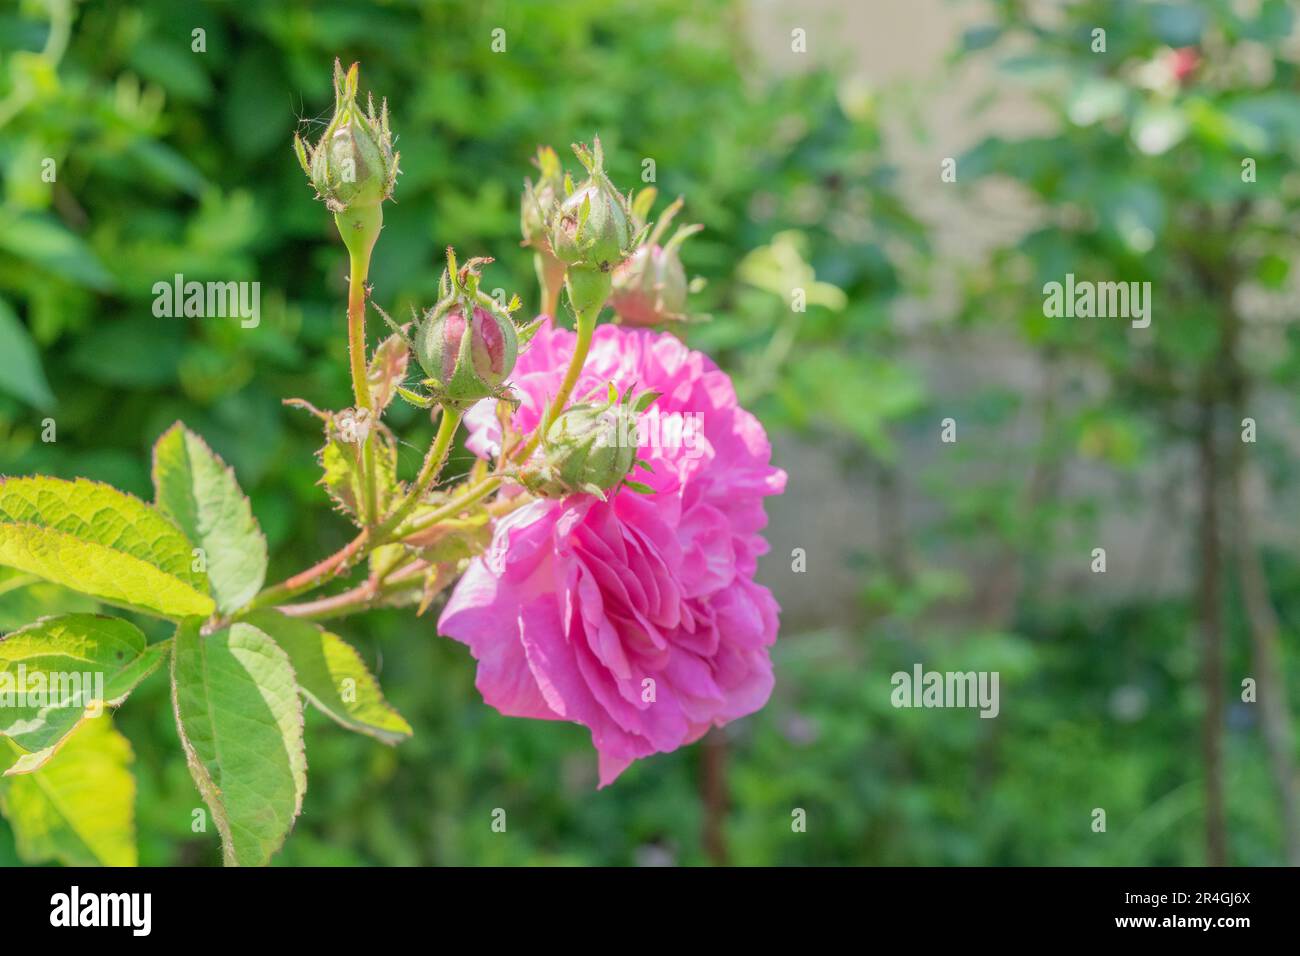 rose bud and rose flowers Stock Photo